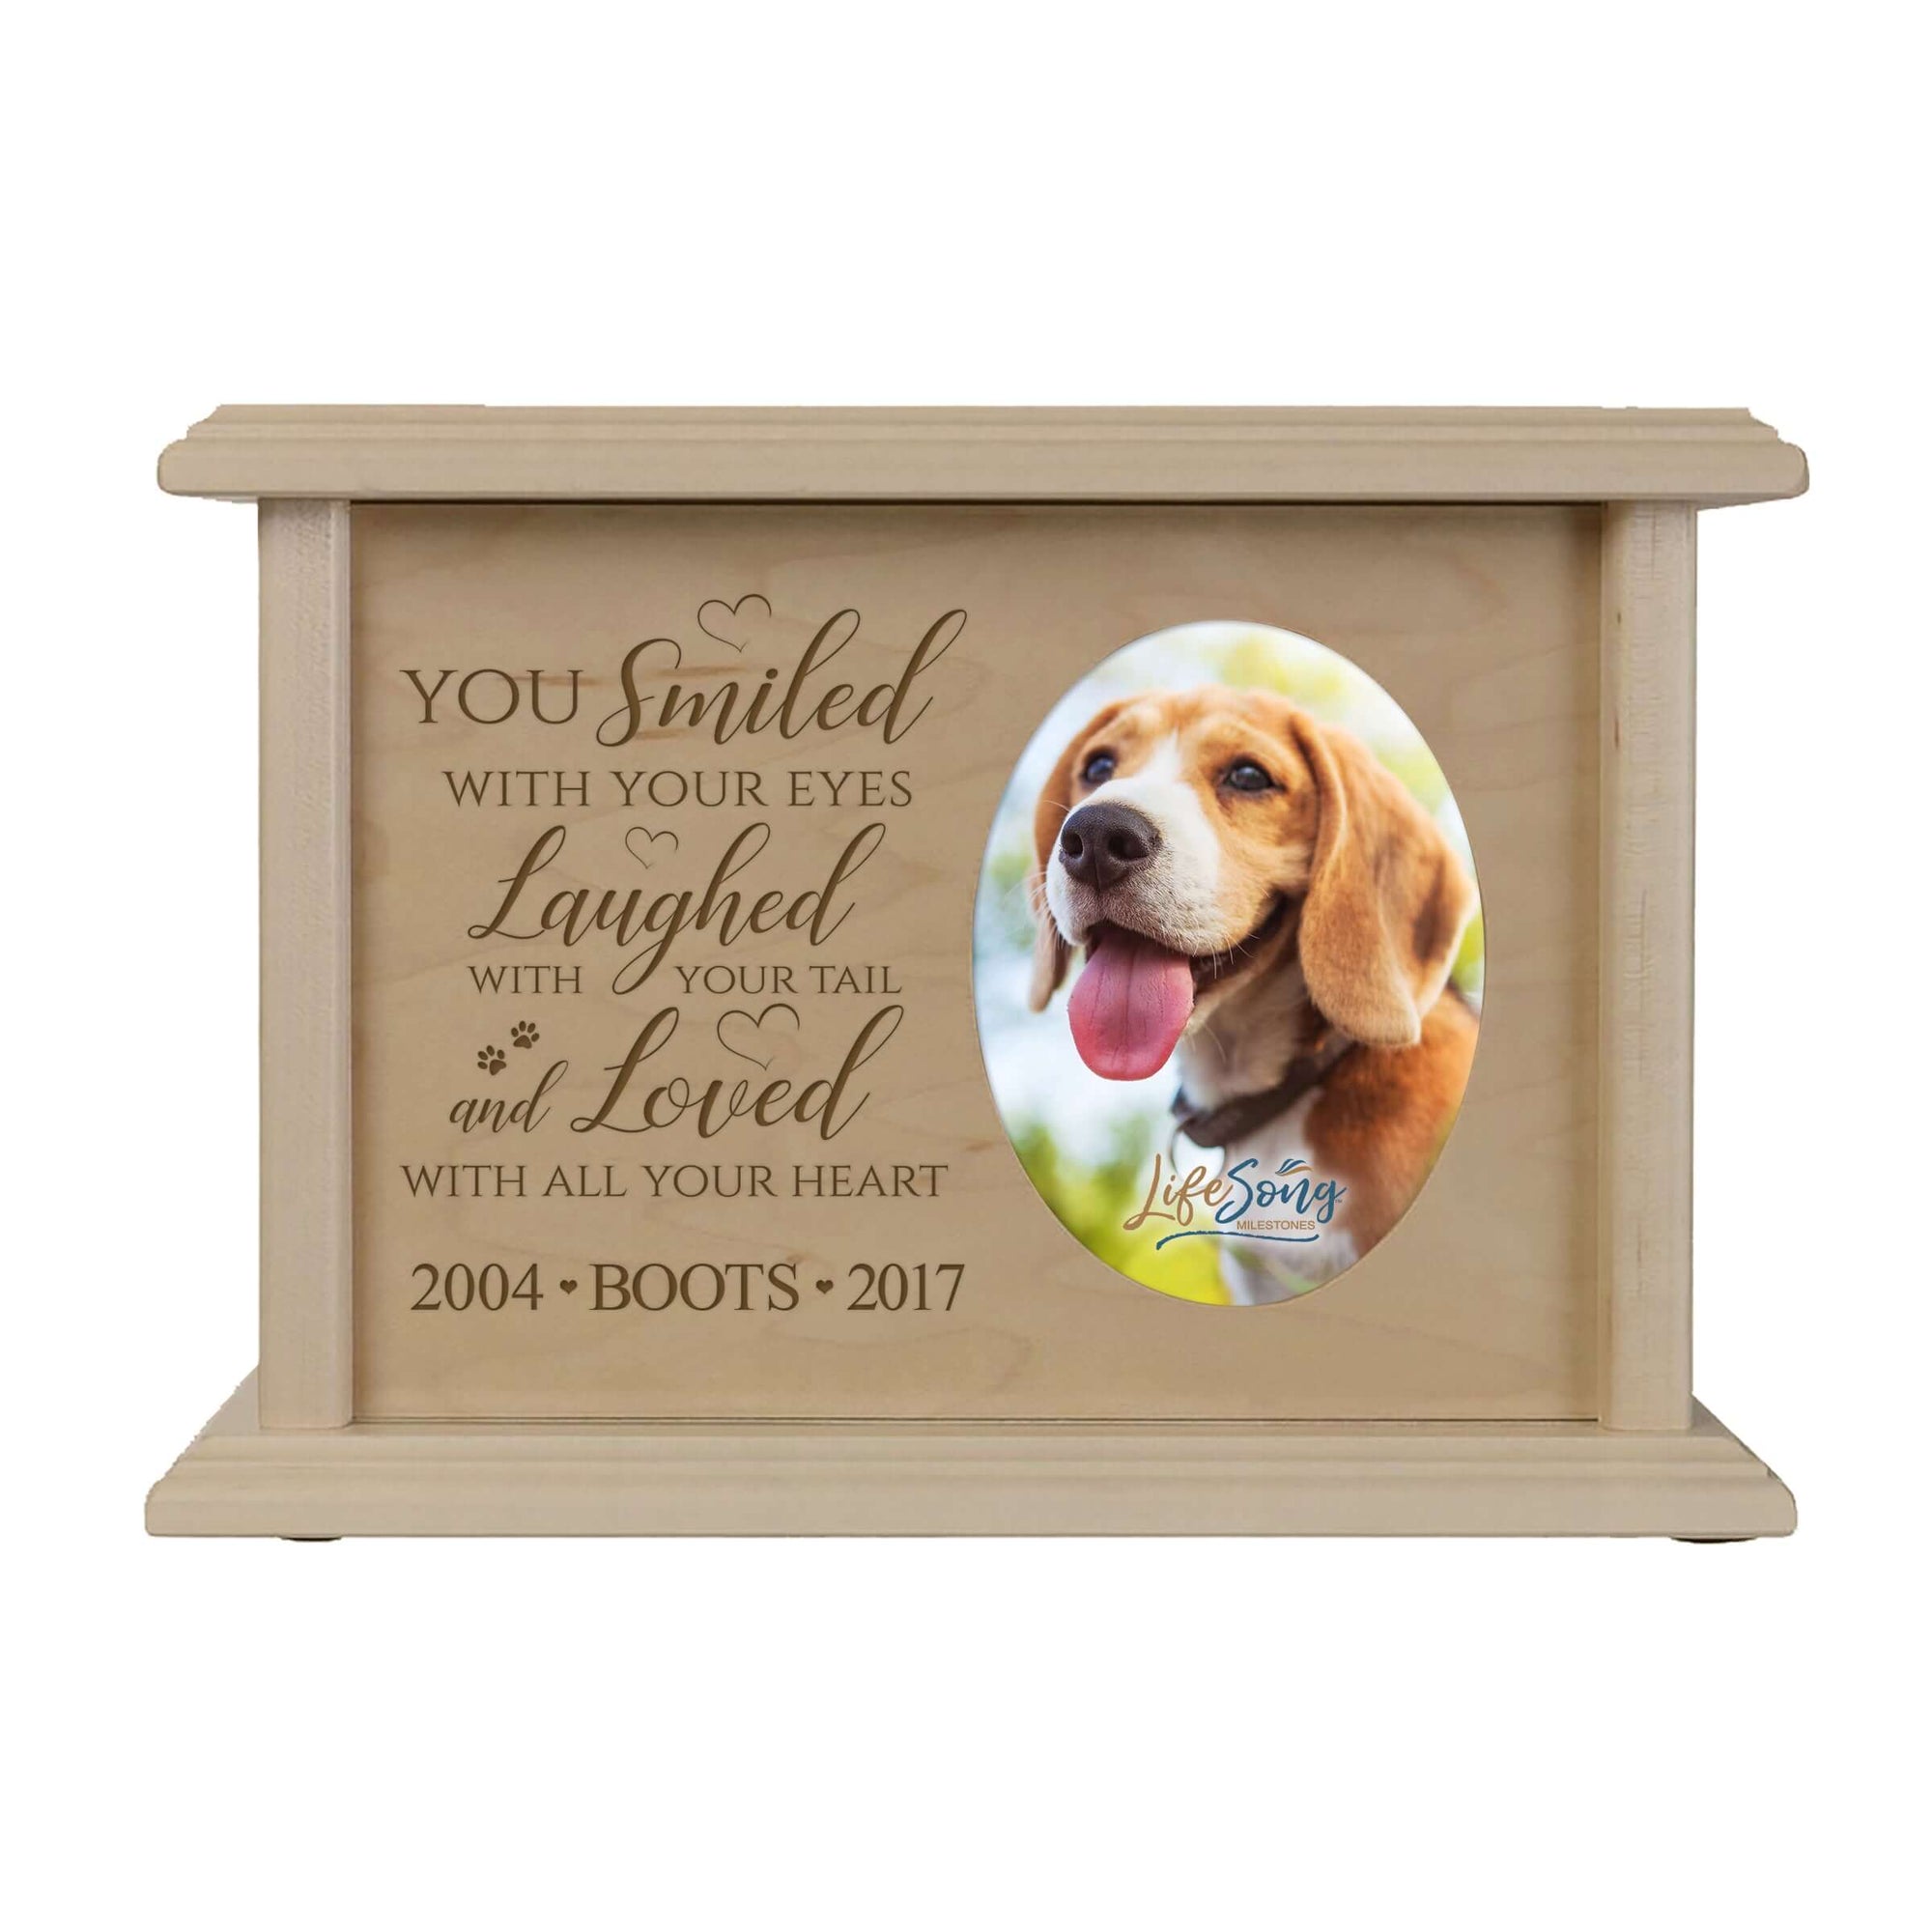 Pet Memorial Picture Cremation Urn Box for Dog or Cat - You Smiled With Your Eyes